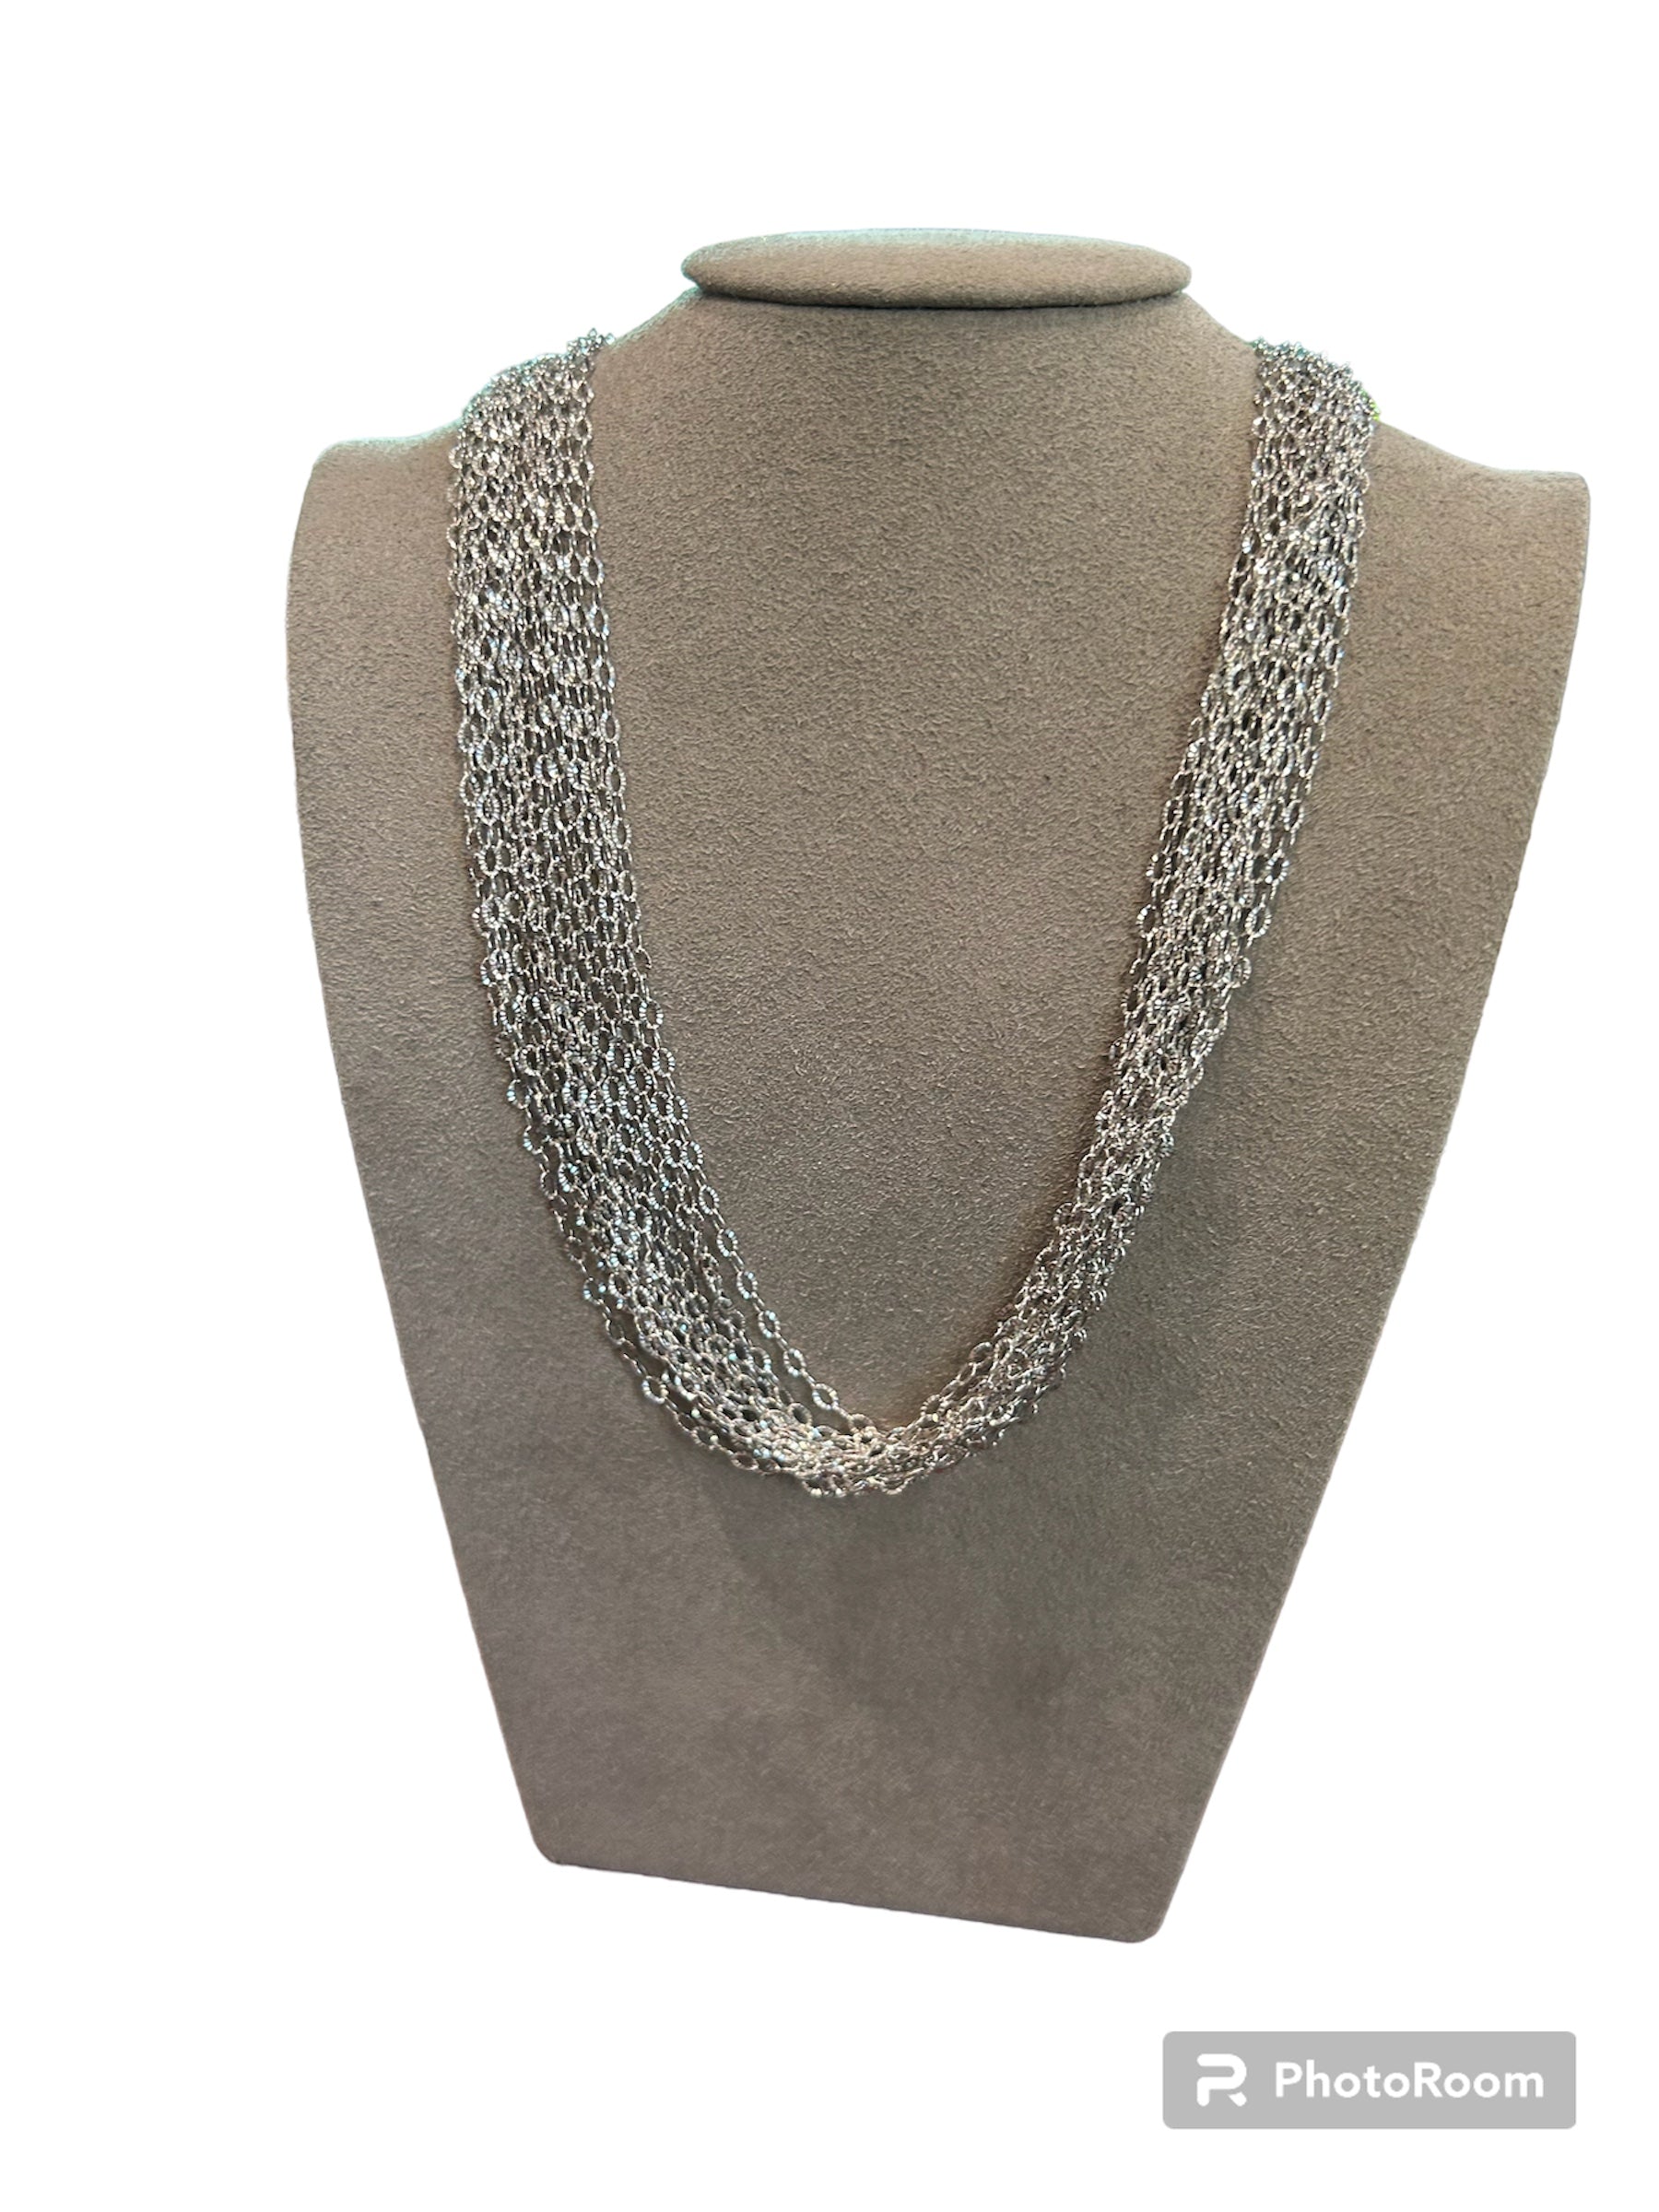 Multi-strand silver necklace with 15 intertwined strands, rolled chains - CL 034